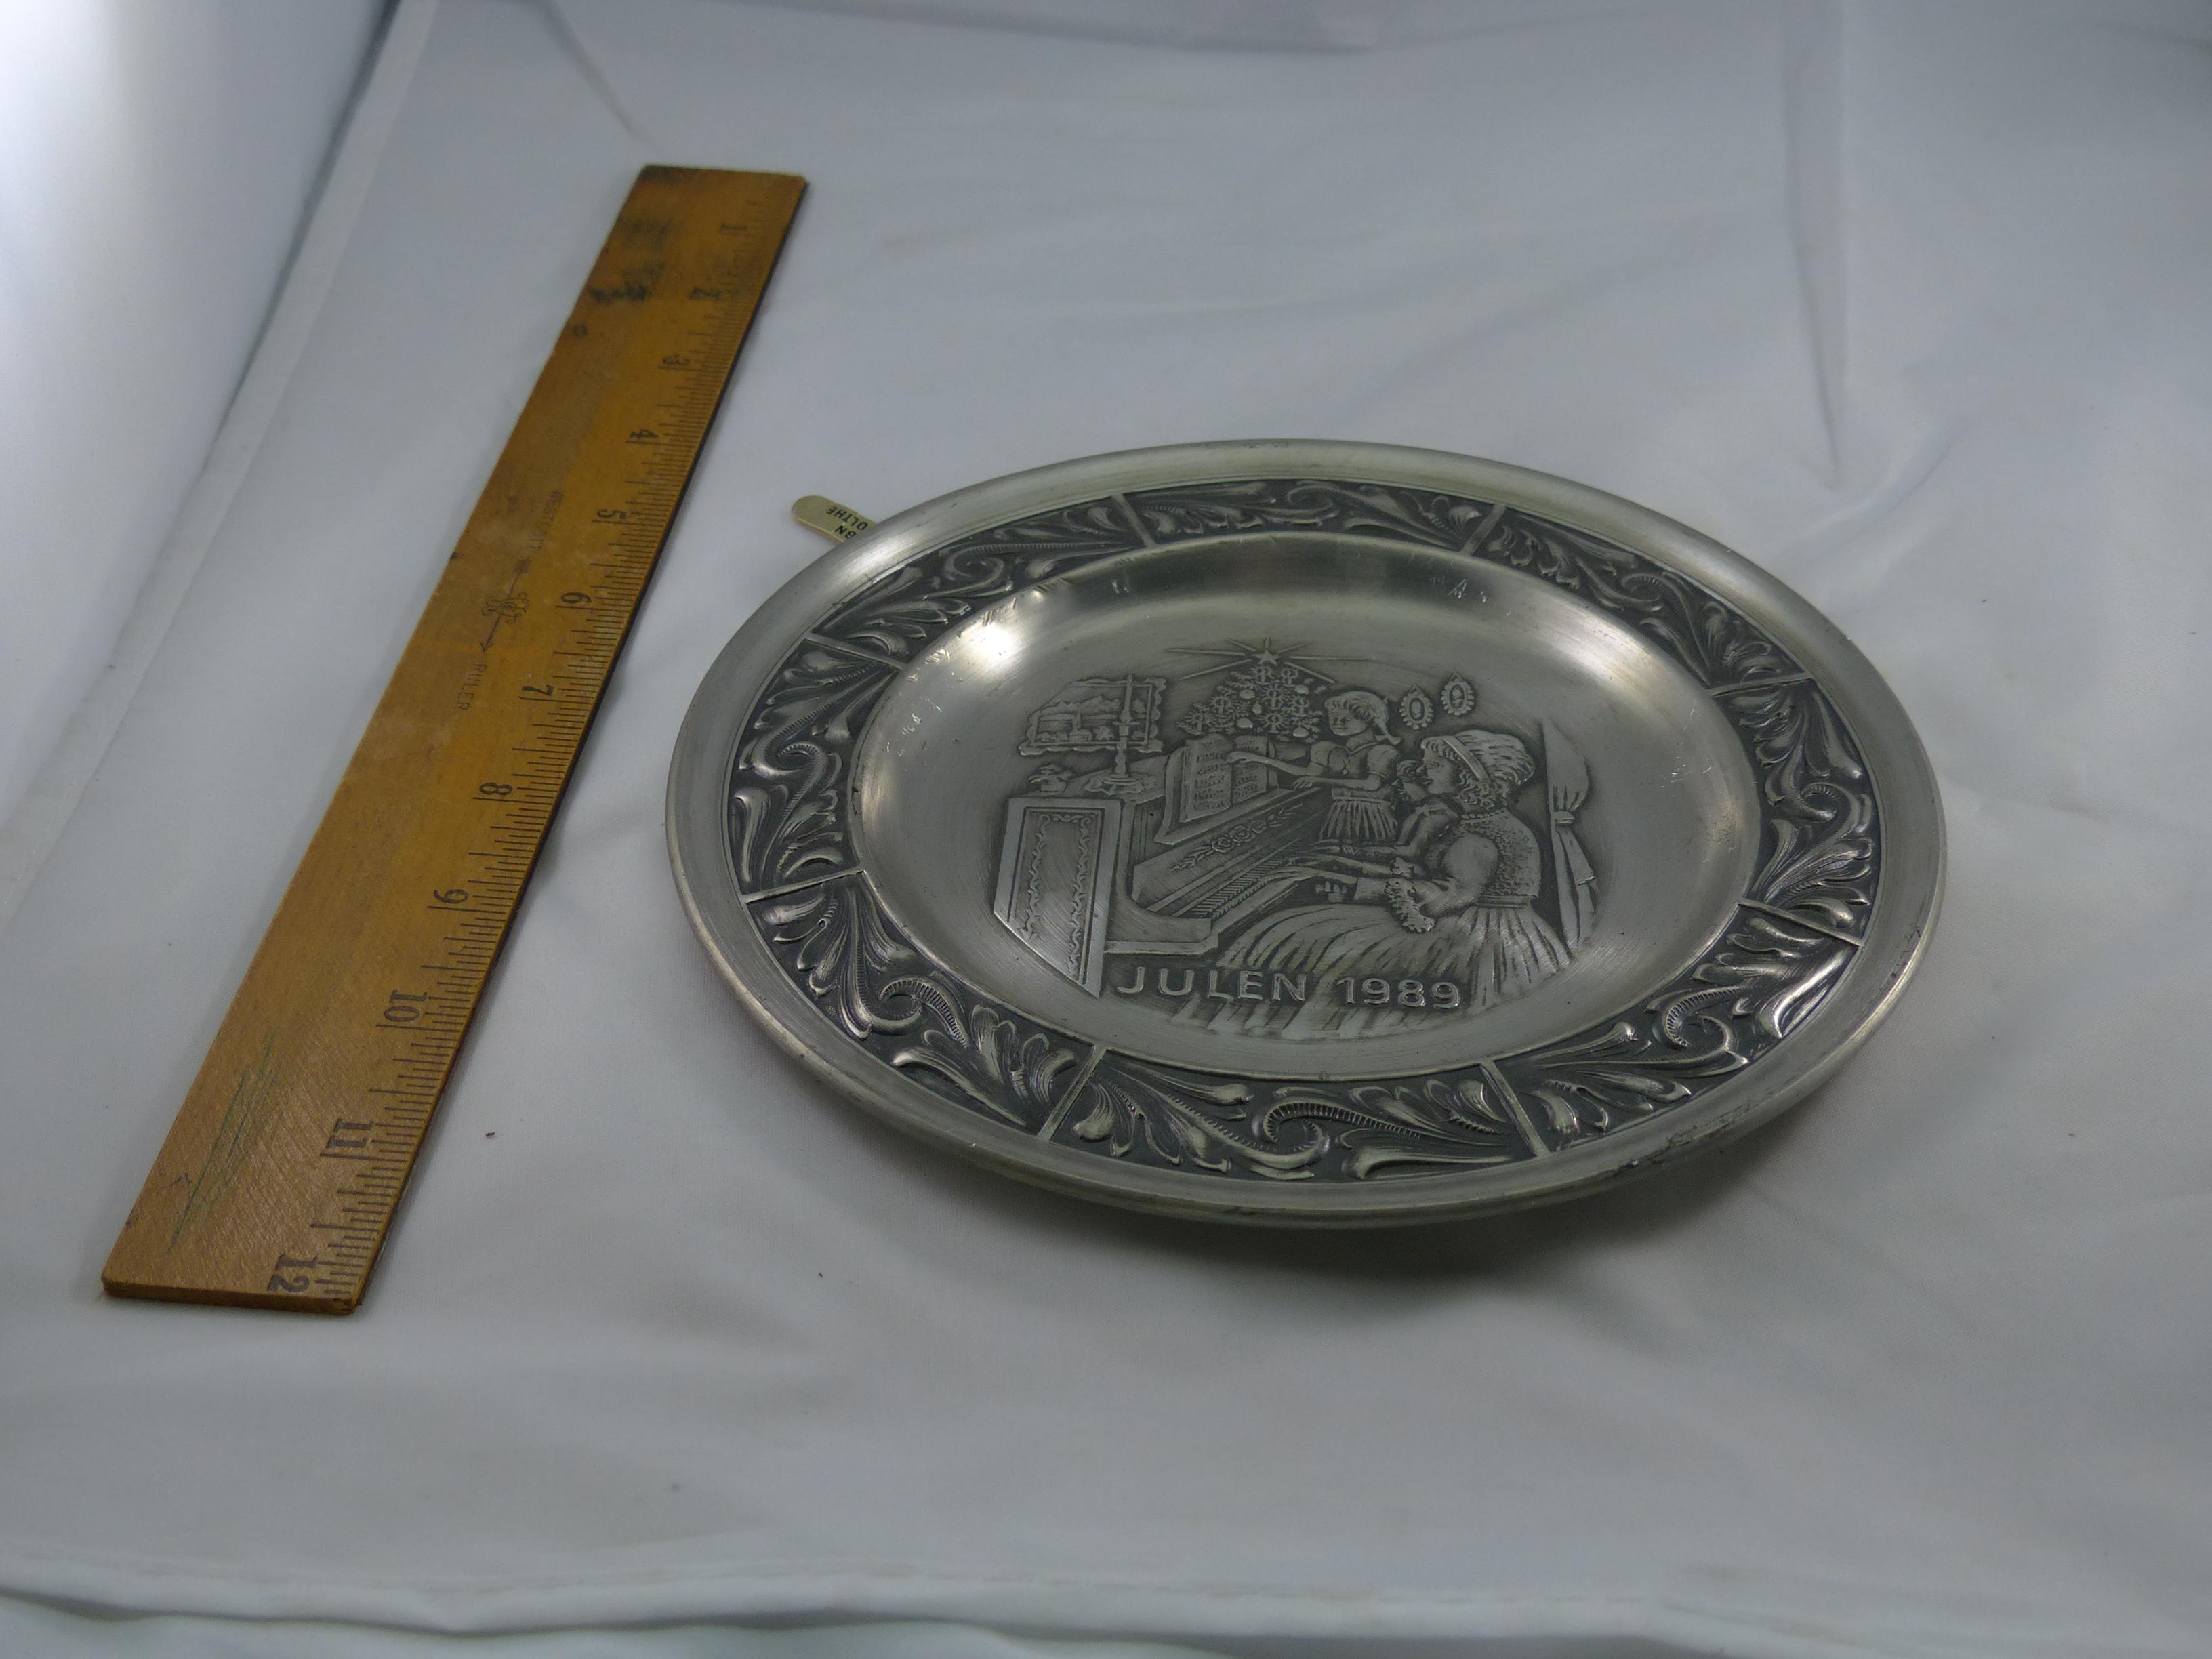 Collectable Julen Pewter Plates